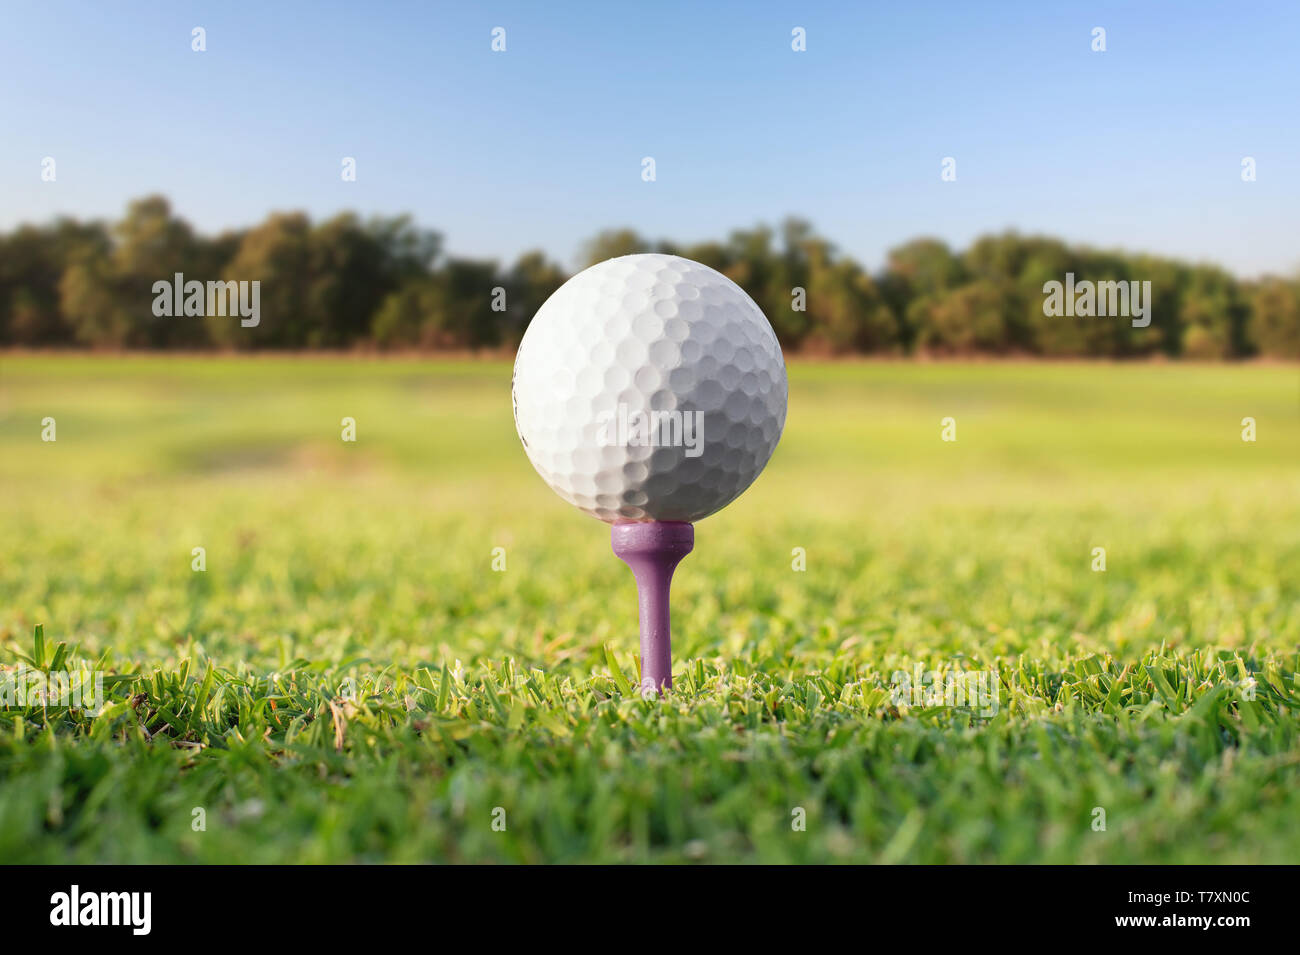 Golf ball on tee at the green golf course. Focus on the ball. Stock Photo